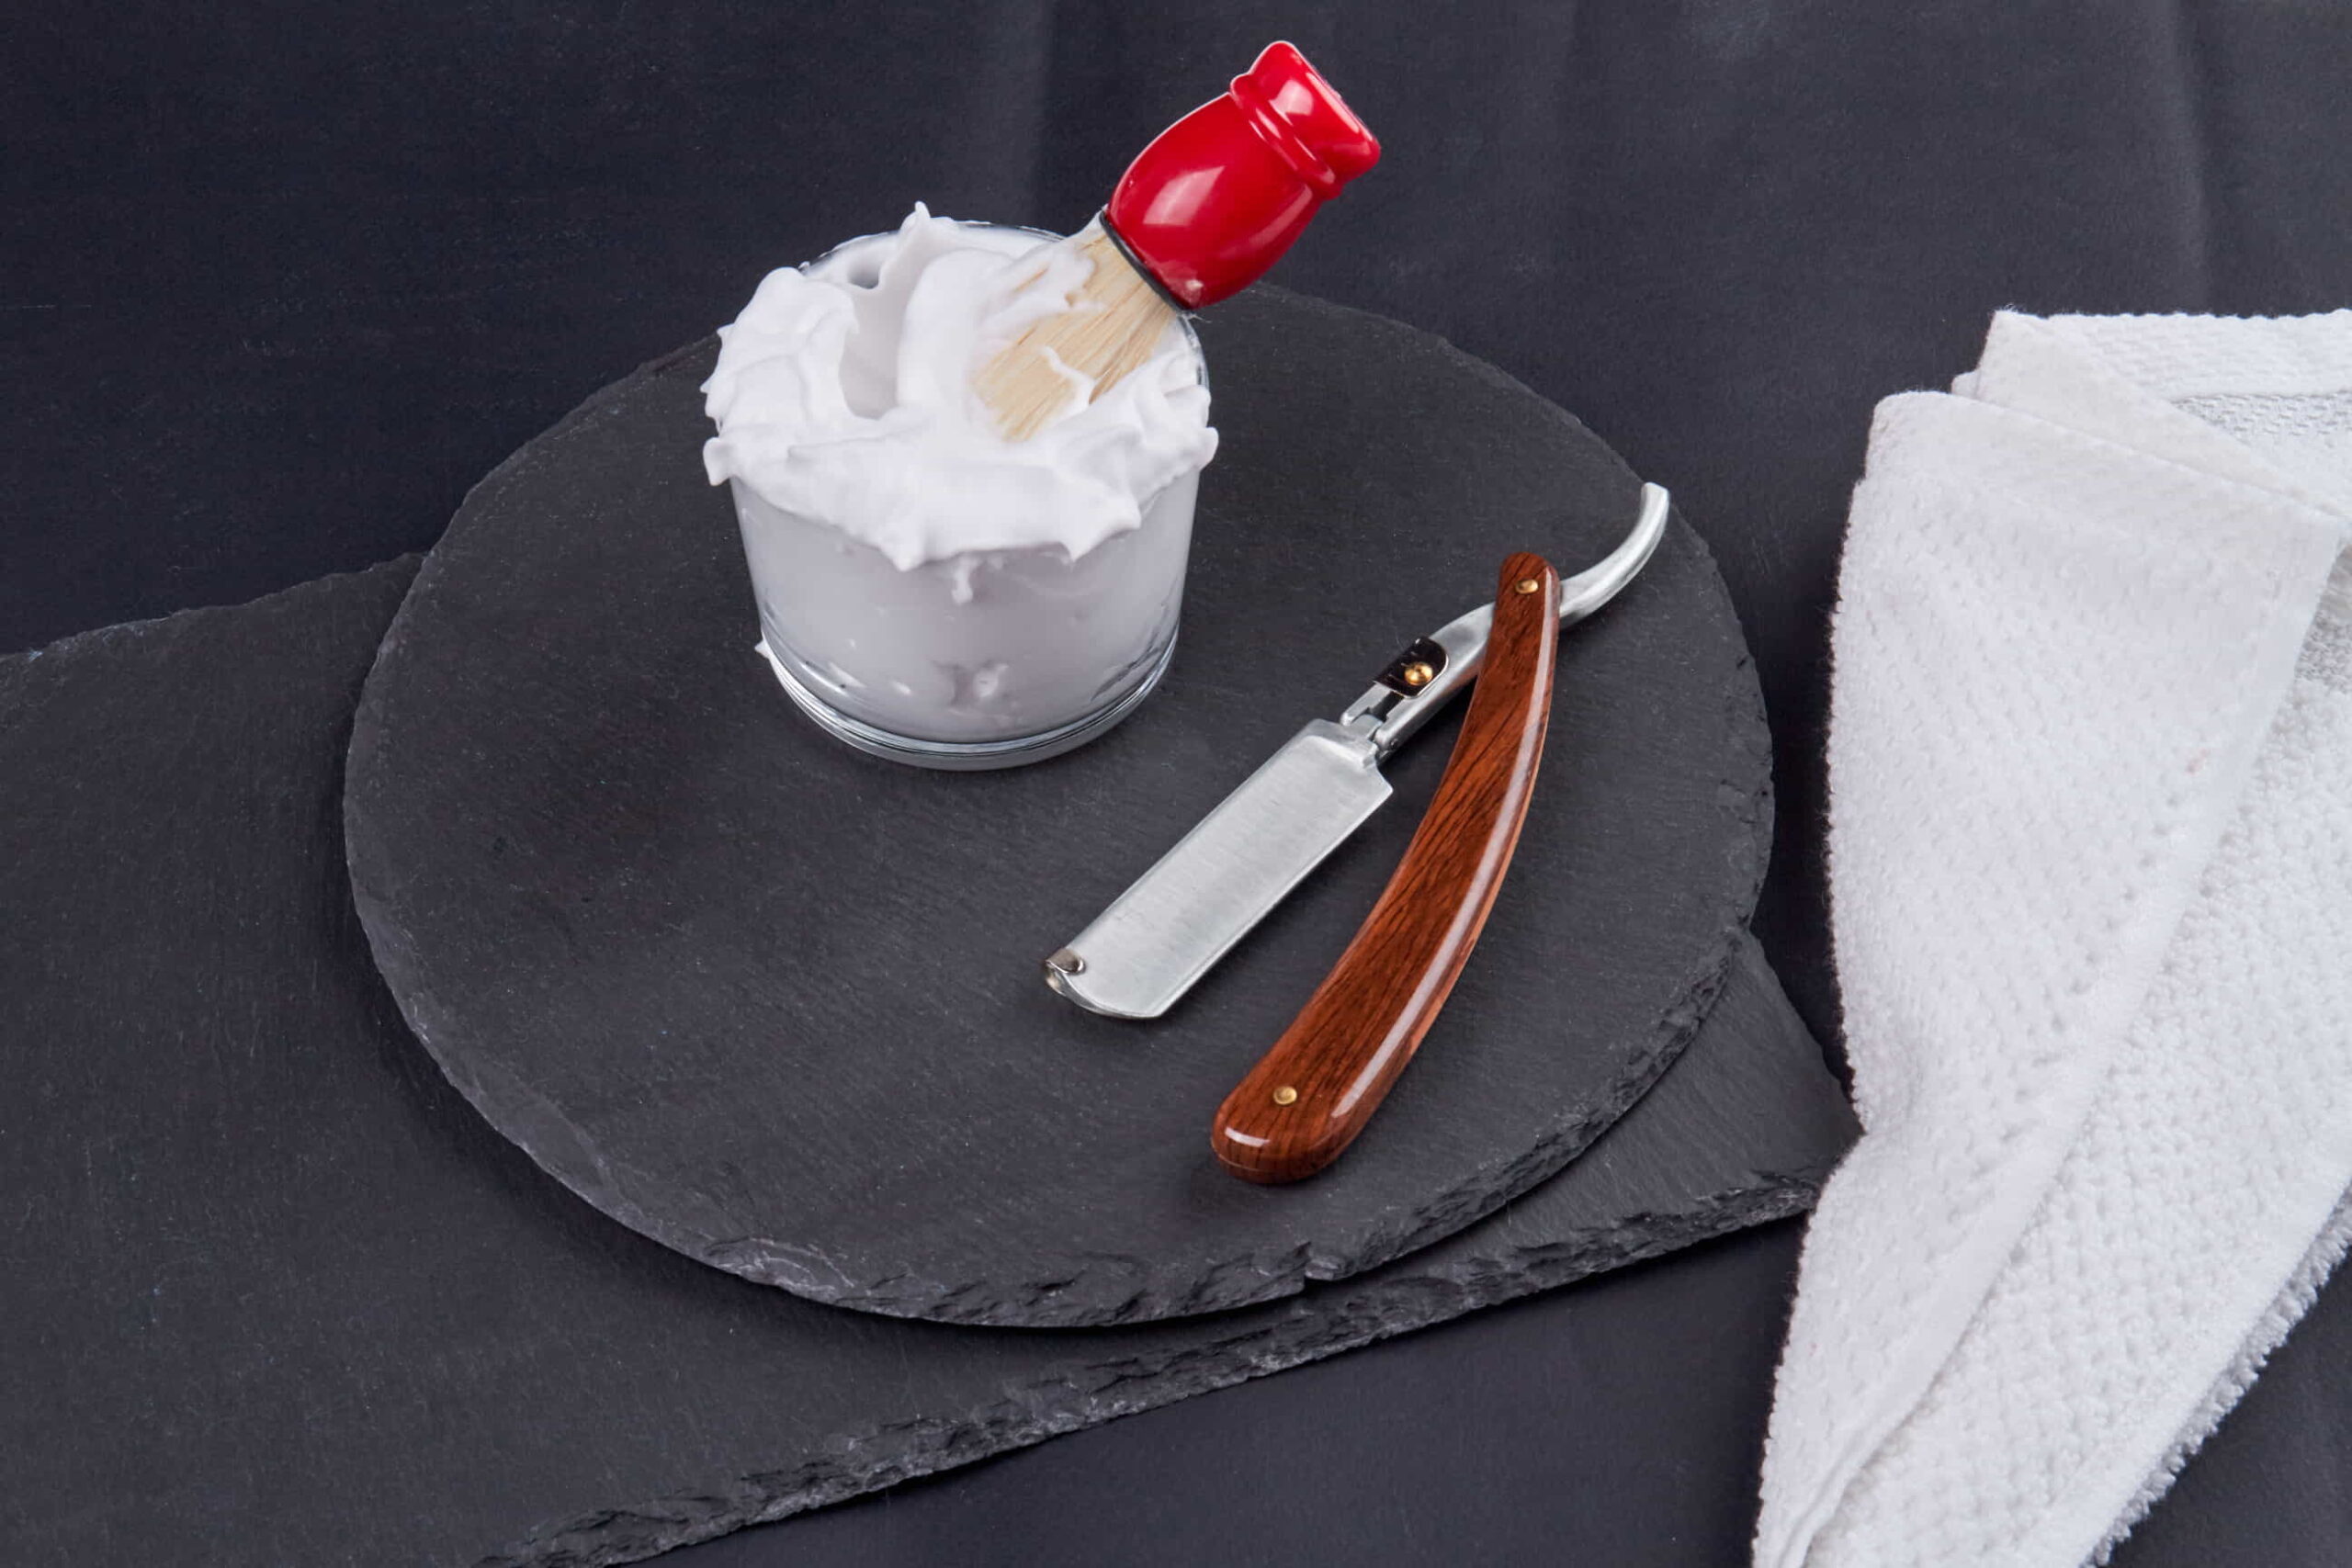 Elegant straight razor with wooden handle, placed beside classic shaving accessories